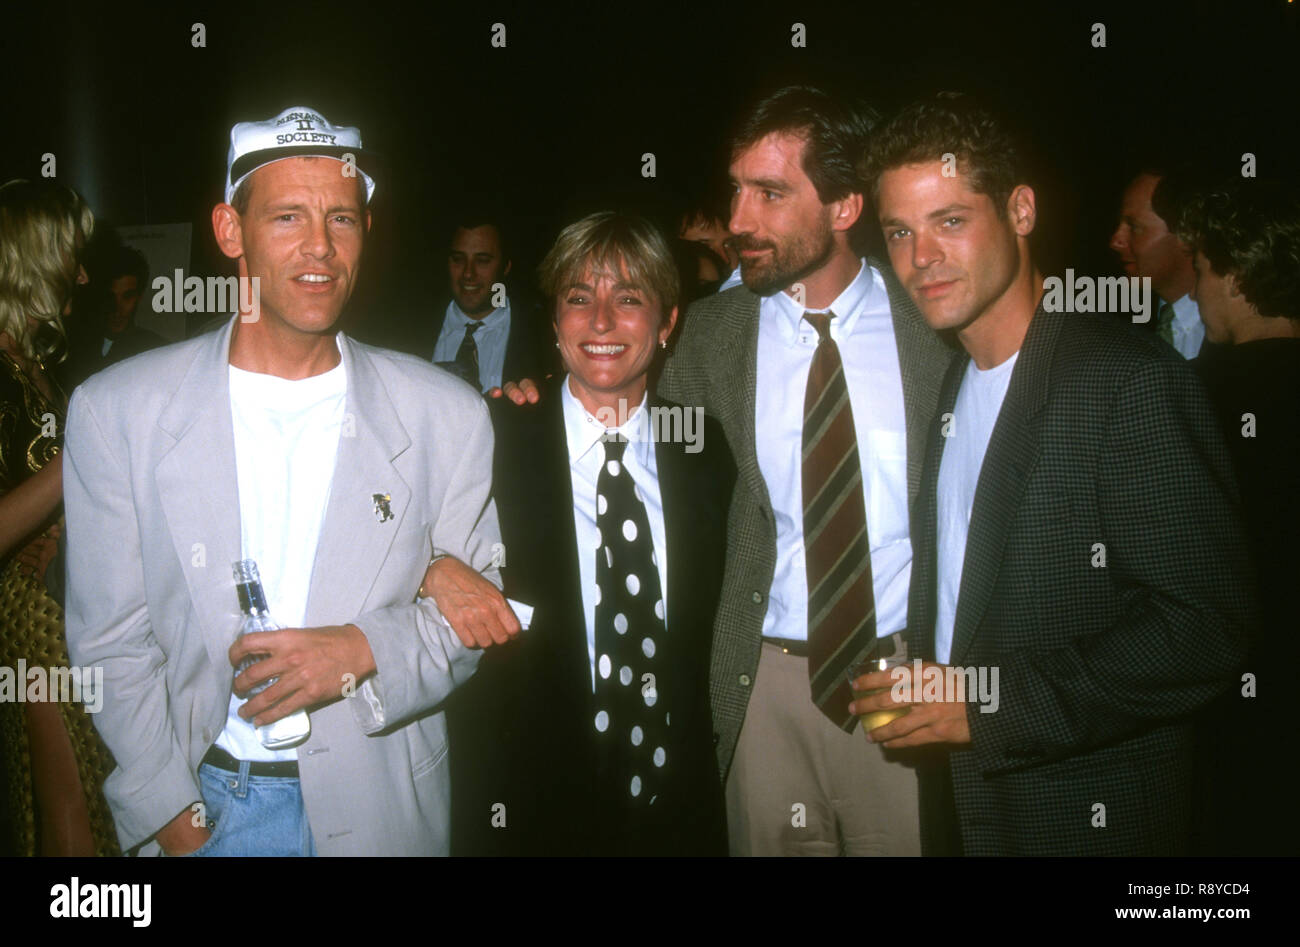 WEST HOLLYWOOD, CA - APRIL 29: Publicist Susan Culley and agent Brian Swardstrom and actor David Barry Gray attend the 'Three of Hearts' West Hollywood Premiere on April 29, 1993 at the DGA Theater in West Hollywood, California. Photo by Barry King/Alamy Stock Photo Stock Photo